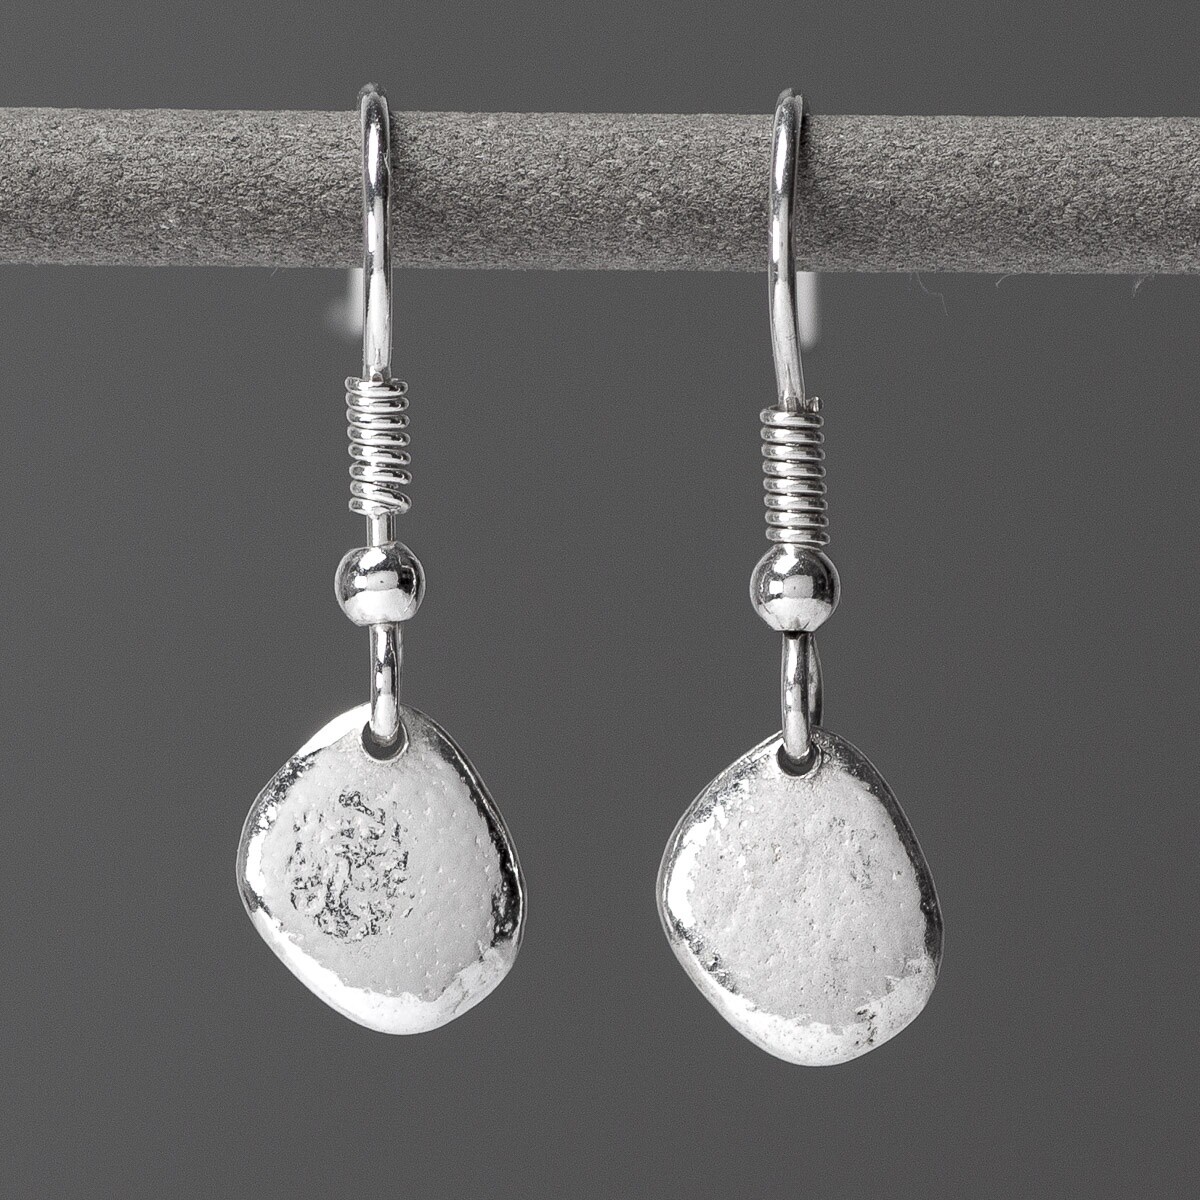 Silver Pebble Drop Earrings Small - Smooth by Silverfish